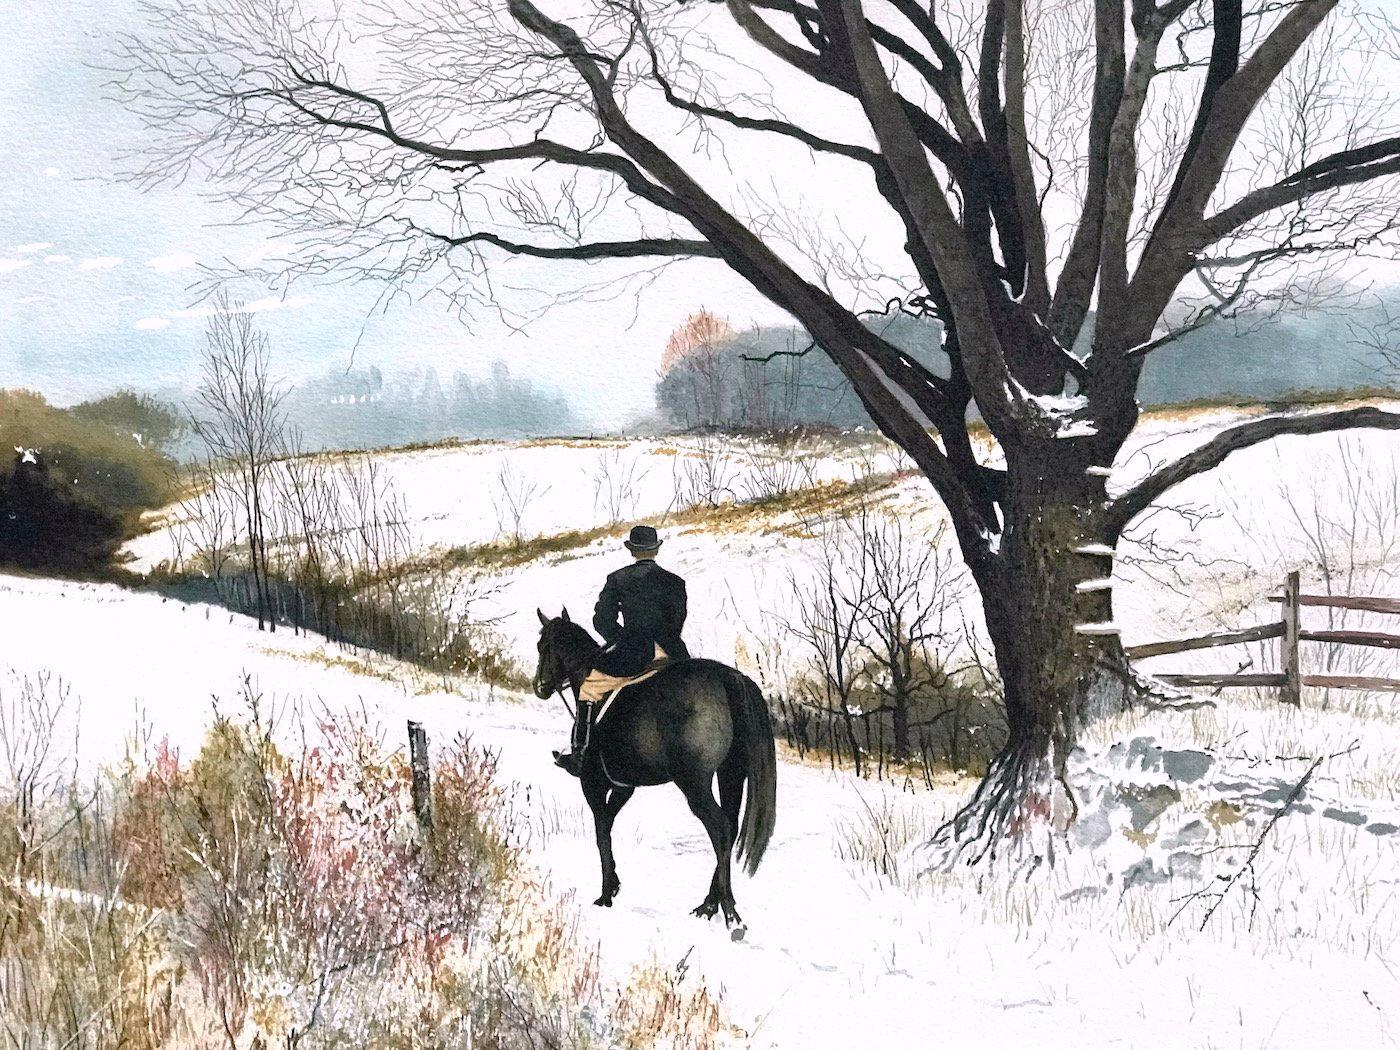 HILLTOPPER Signed Lithograph, Snow Covered Hilltop, Equestrian English Riding - Print by Peter Sculthorpe